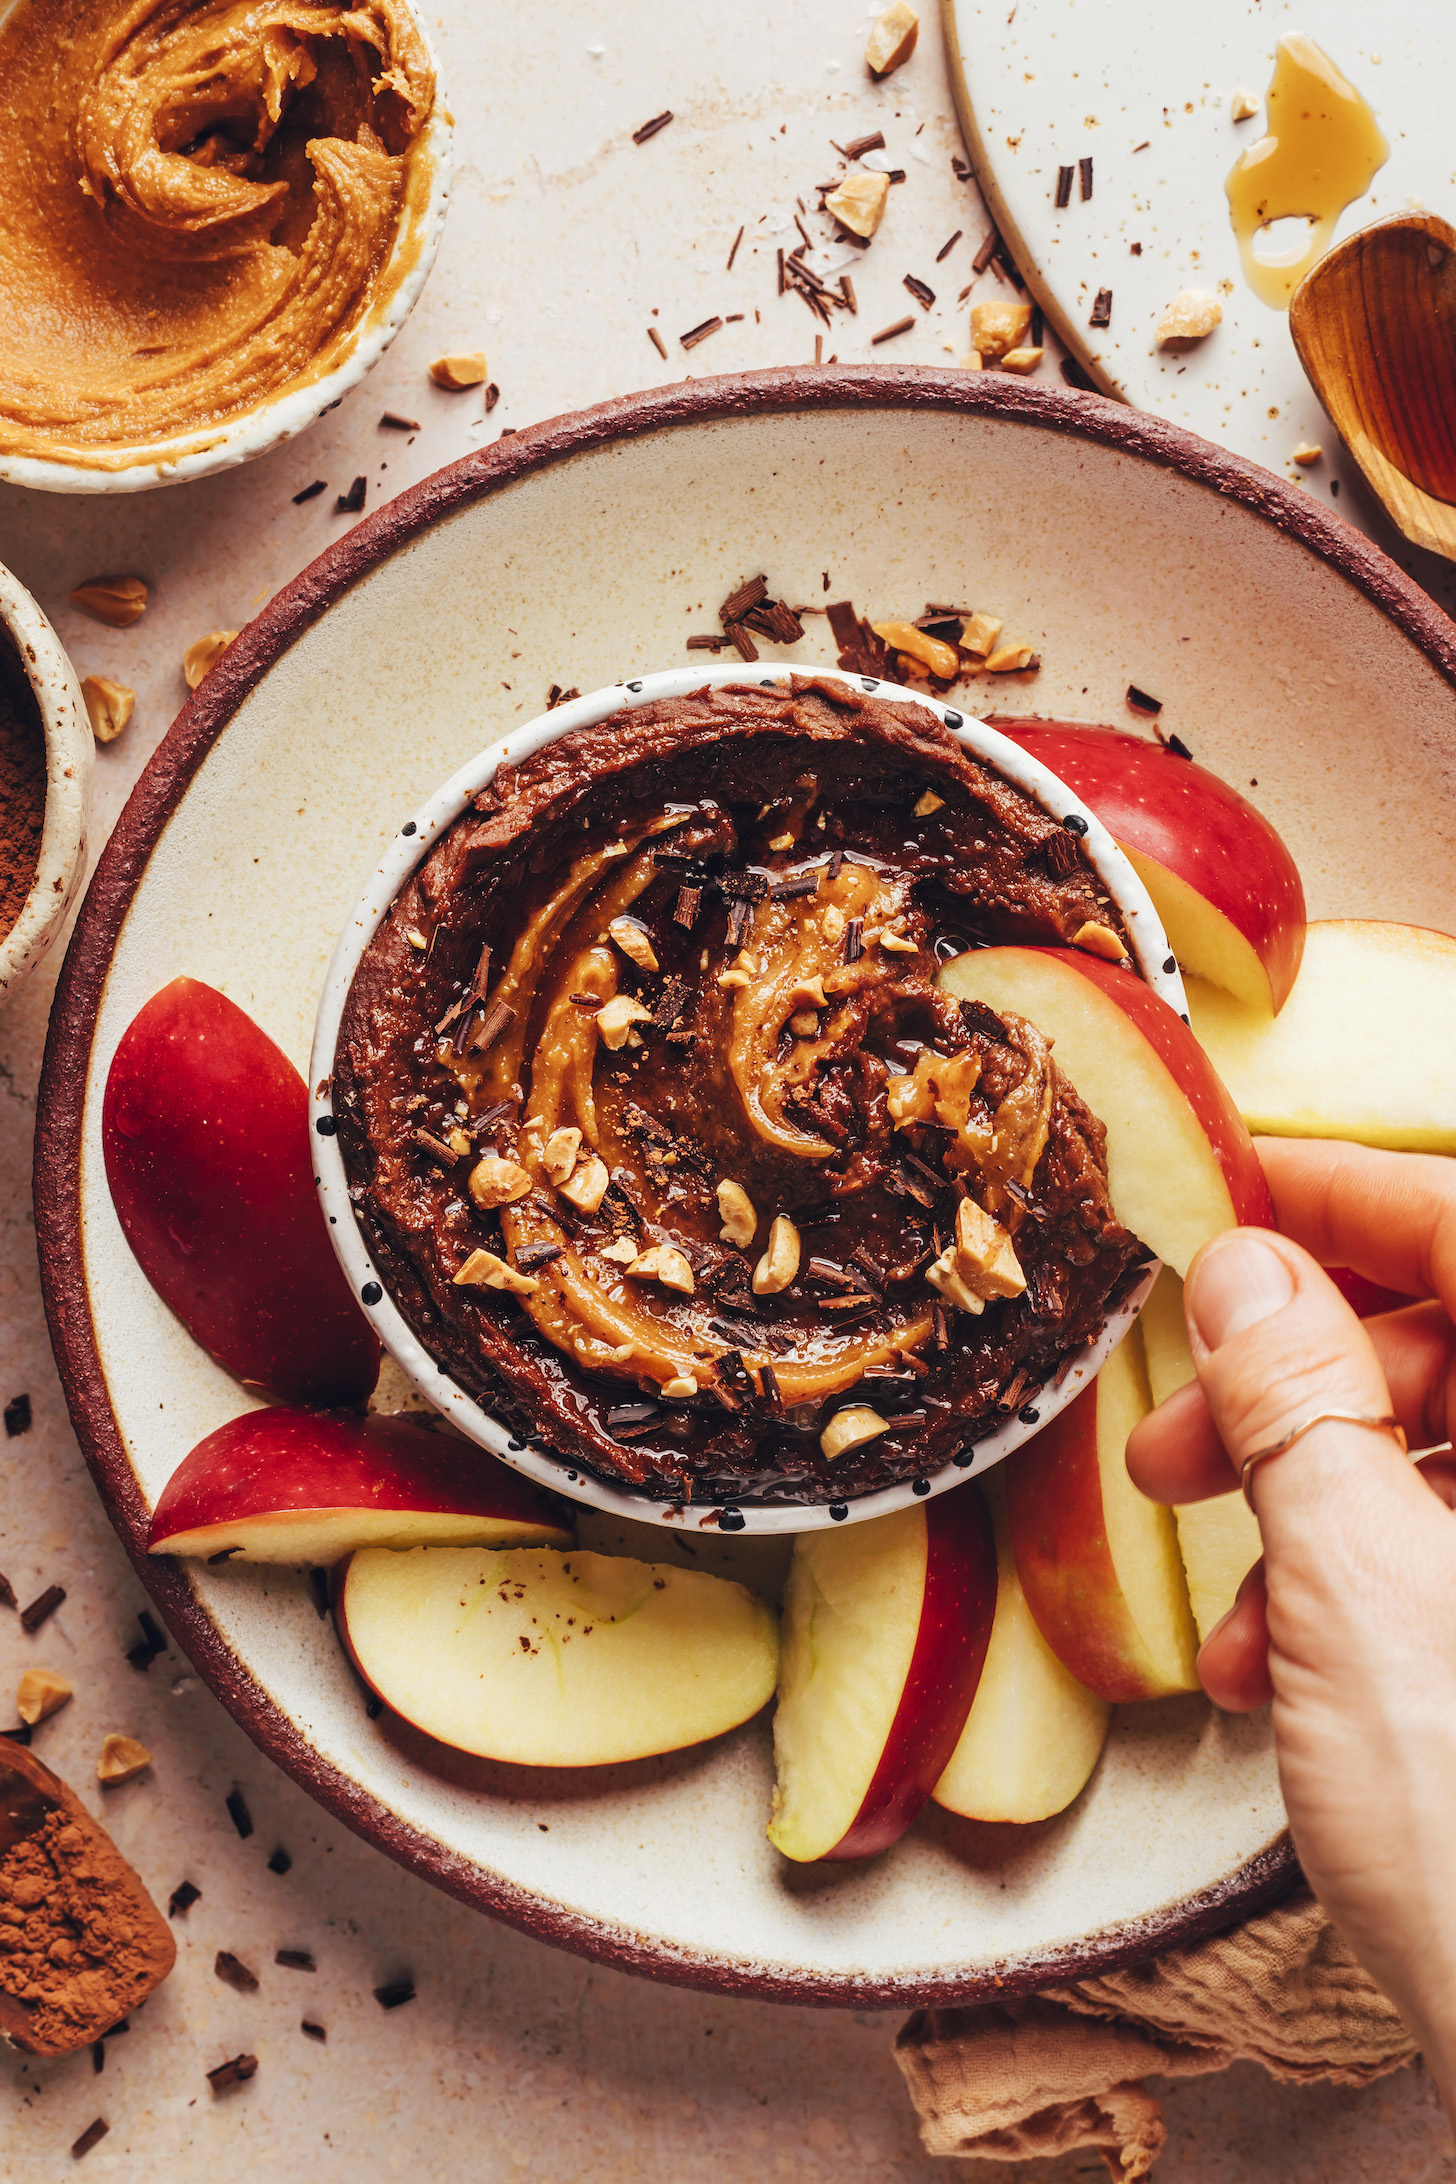 Dipping an apple slice into a bowl of chocolate peanut butter hummus